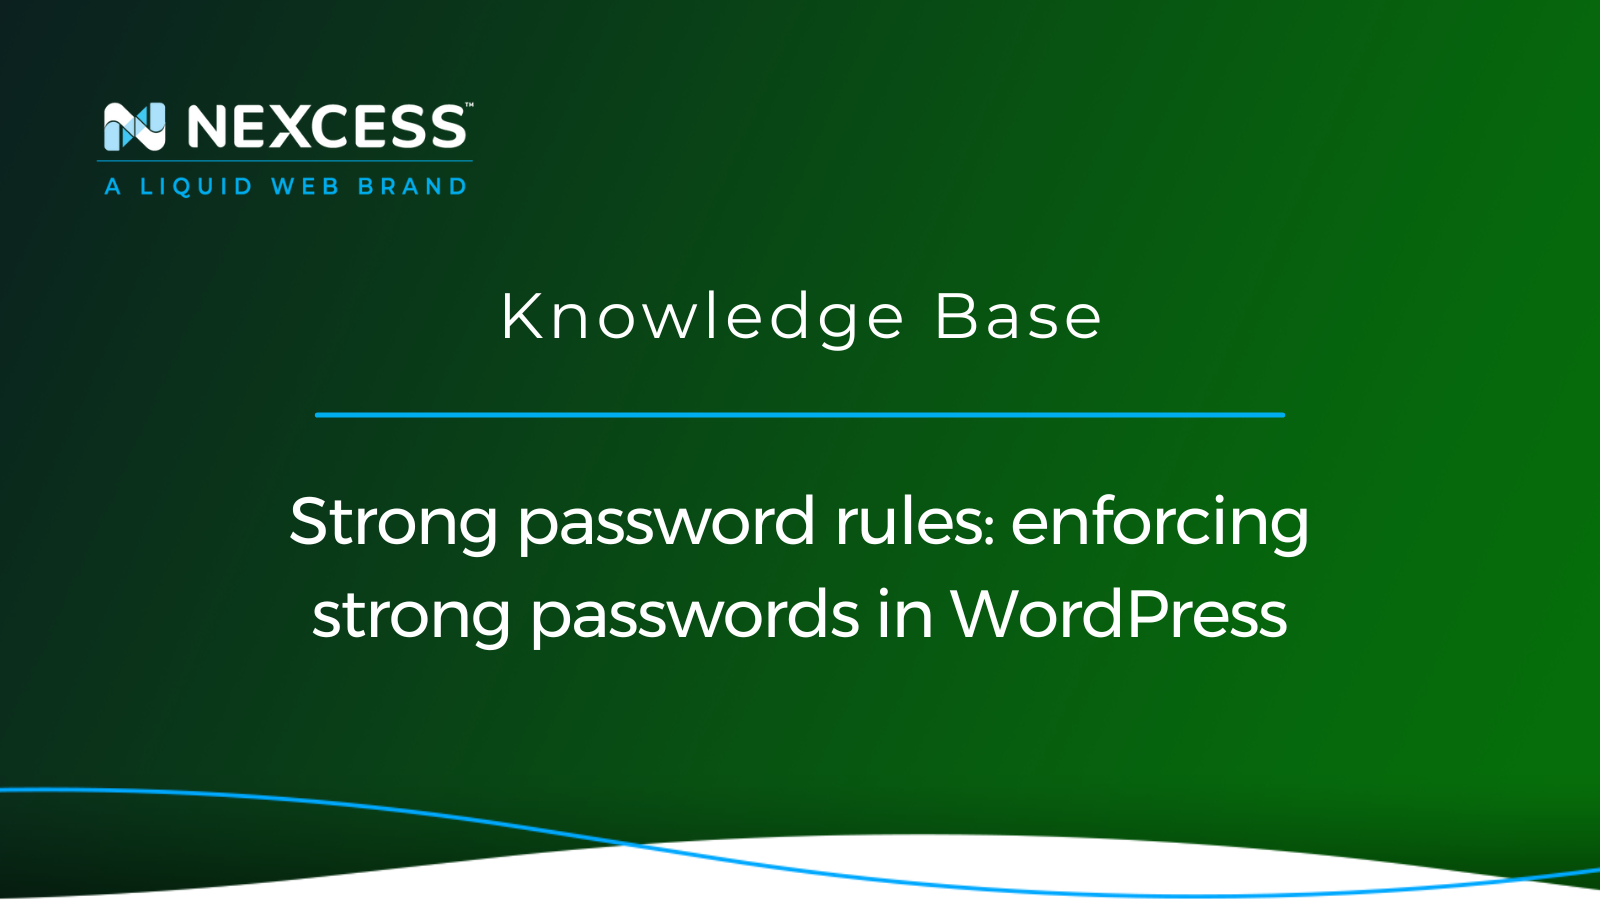 Strong password rules: enforcing strong passwords in WordPress